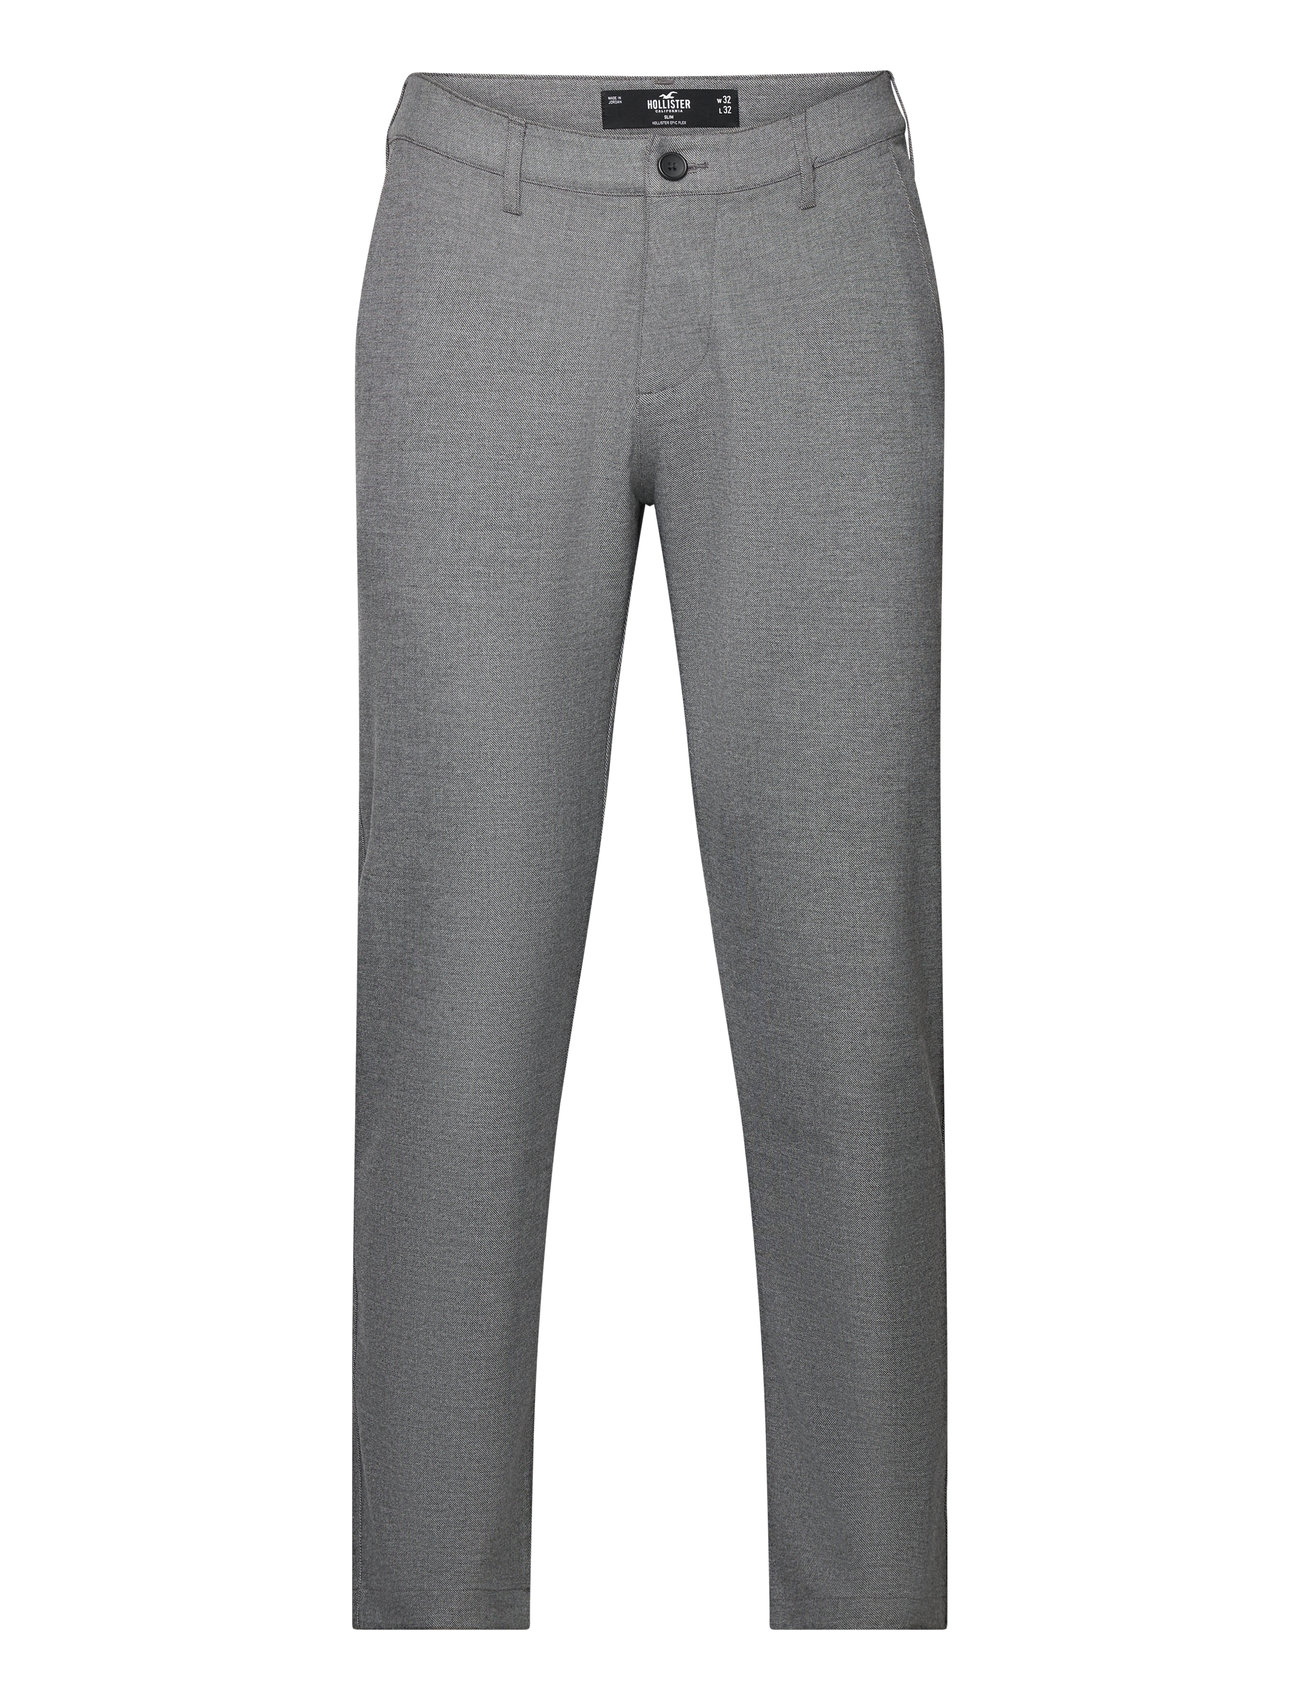 Hollister Hco. Guys Pants - Tailored trousers 